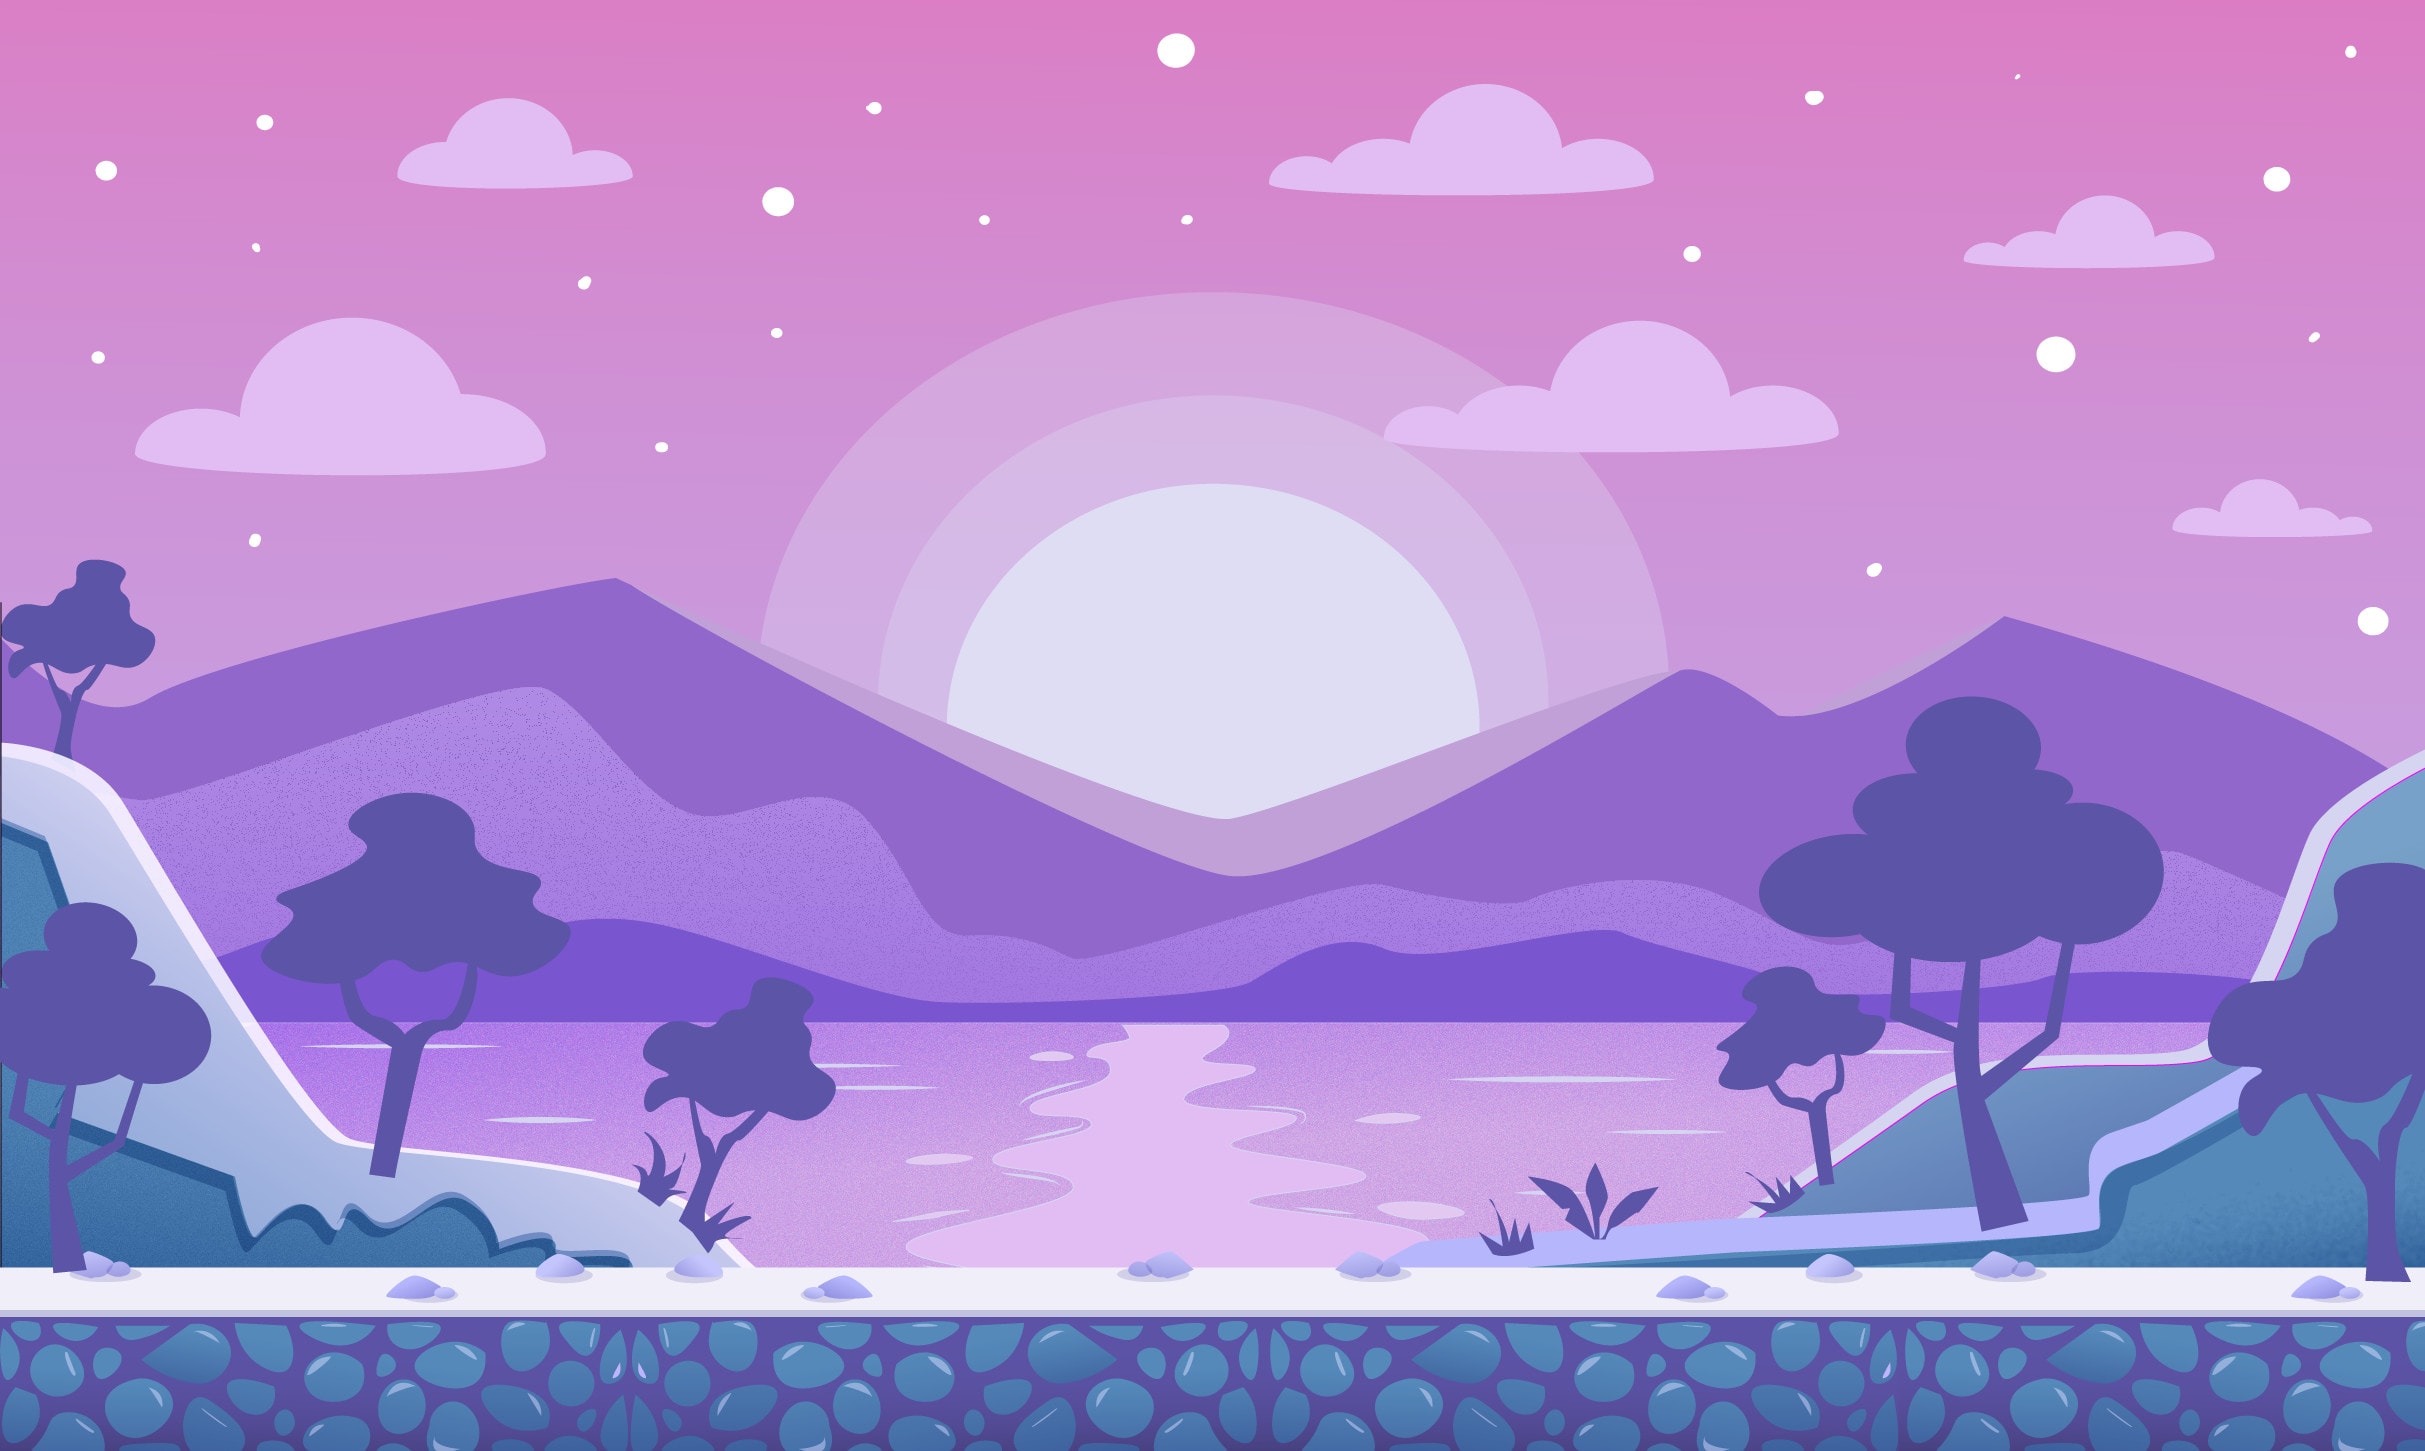 Draw level design background for 2d game by Alexandra8797 | Fiverr